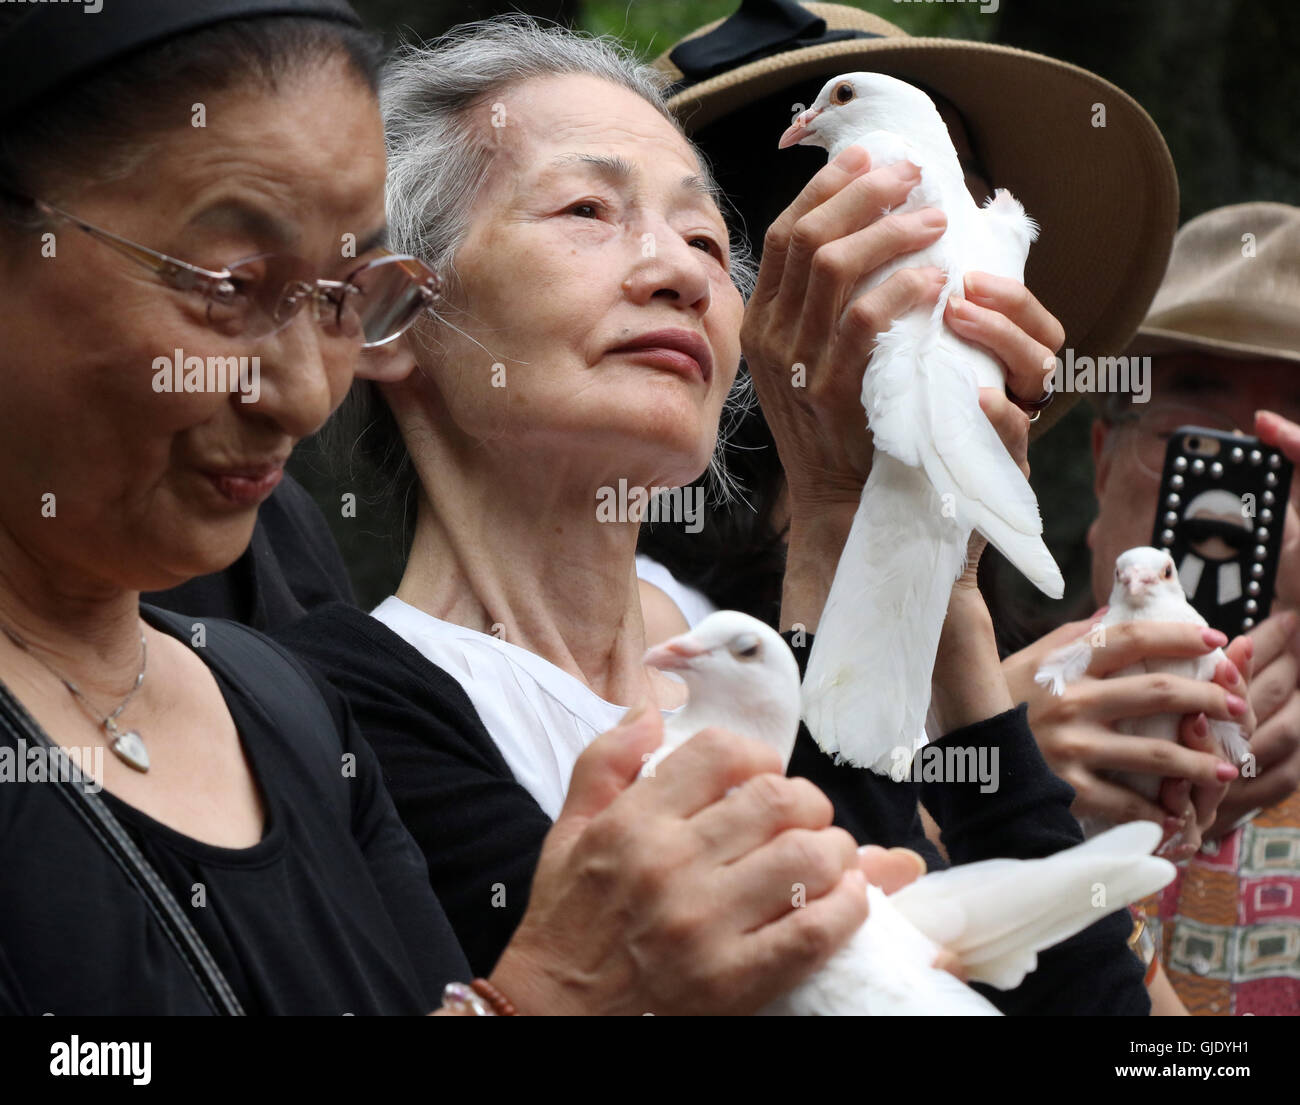 Tokyo, Japan. 15th Aug, 2016. People release doves to pray for peace at the controversial Yasukuni shrine in Tokyo as the honour the war dead on the 71st anniversary of Japan's surrender in World War II, on Monday, August 15, 2016. © Yoshio Tsunoda/AFLO/Alamy Live News Stock Photo